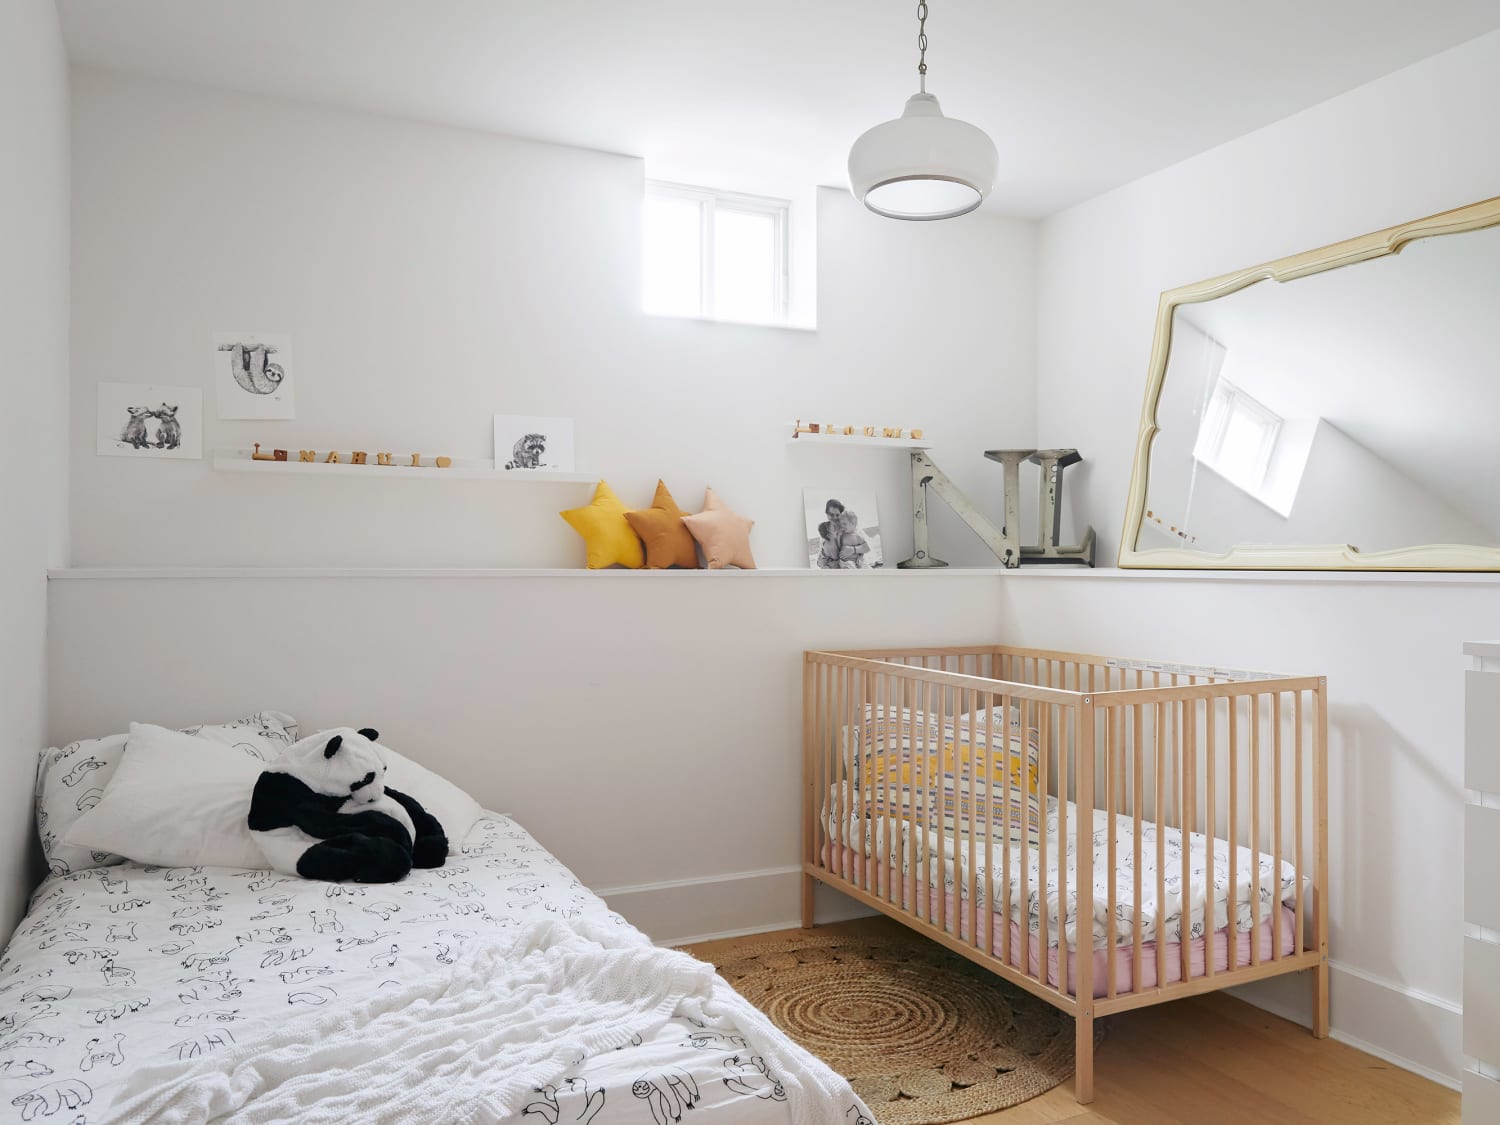 Floor Beds For Toddlers: A Safe And Cozy Sleeping Option - Famous Parenting